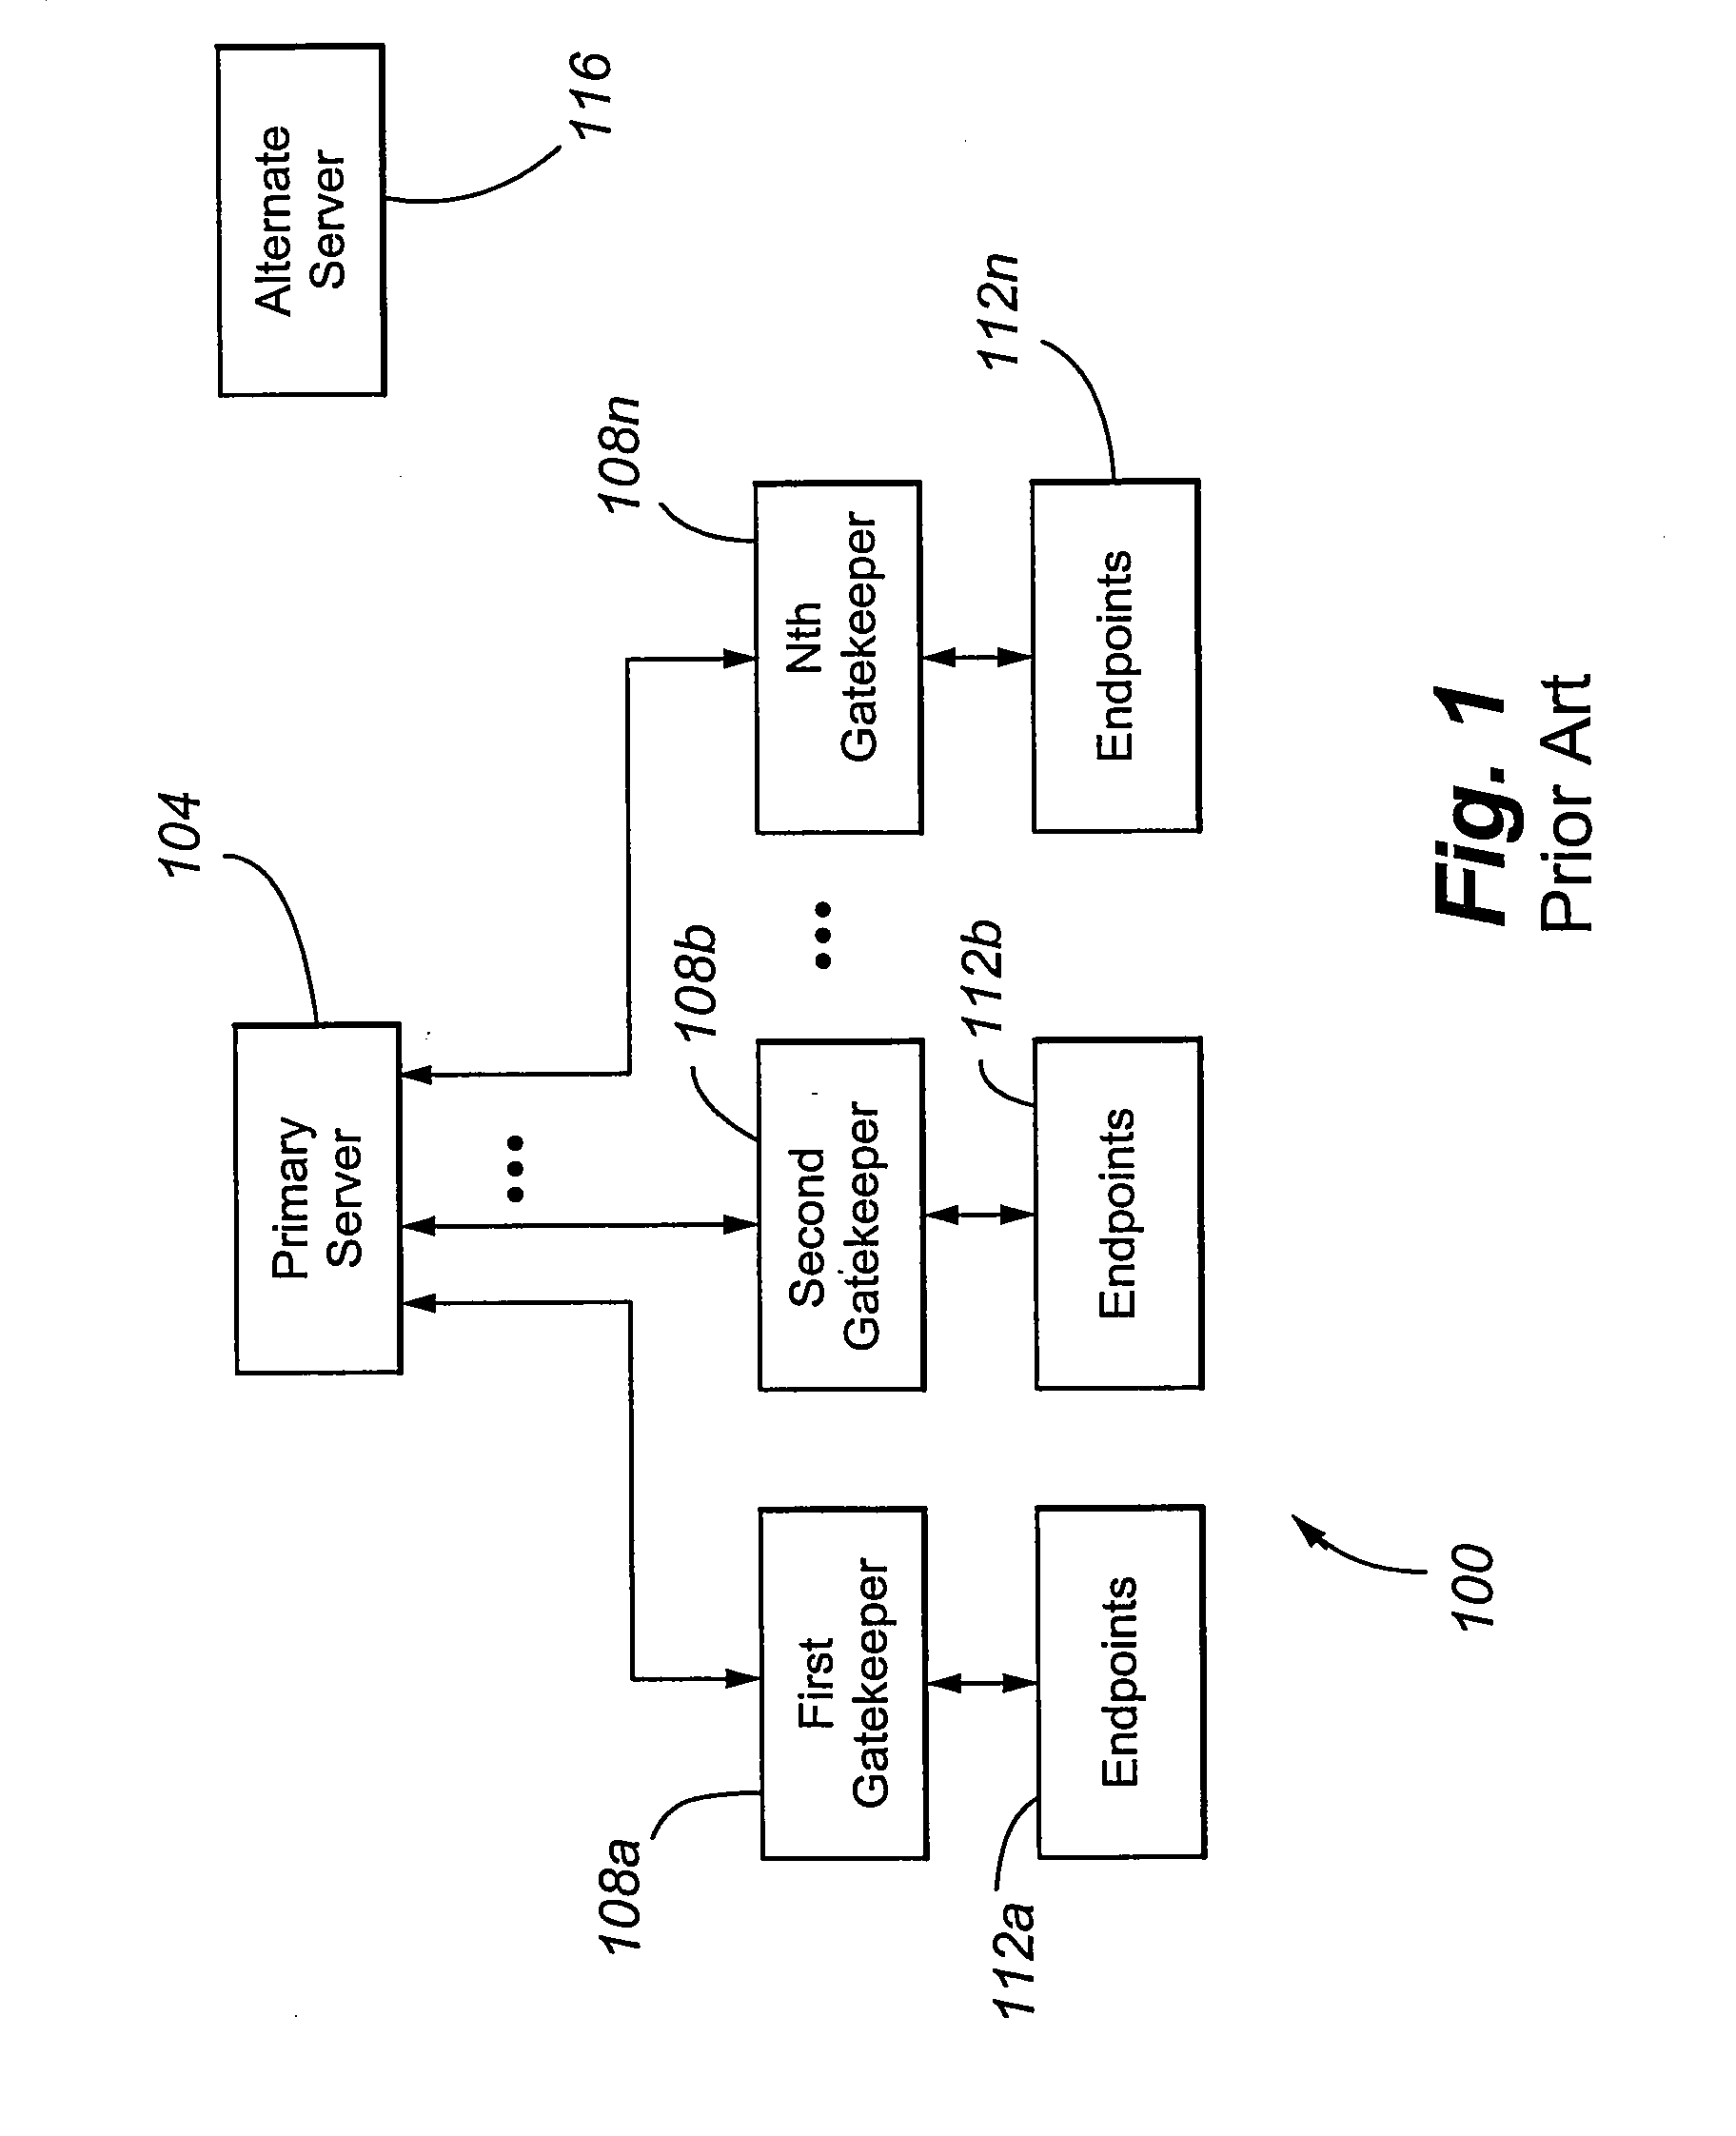 Efficient load balancing and heartbeat mechanism for telecommunication endpoints